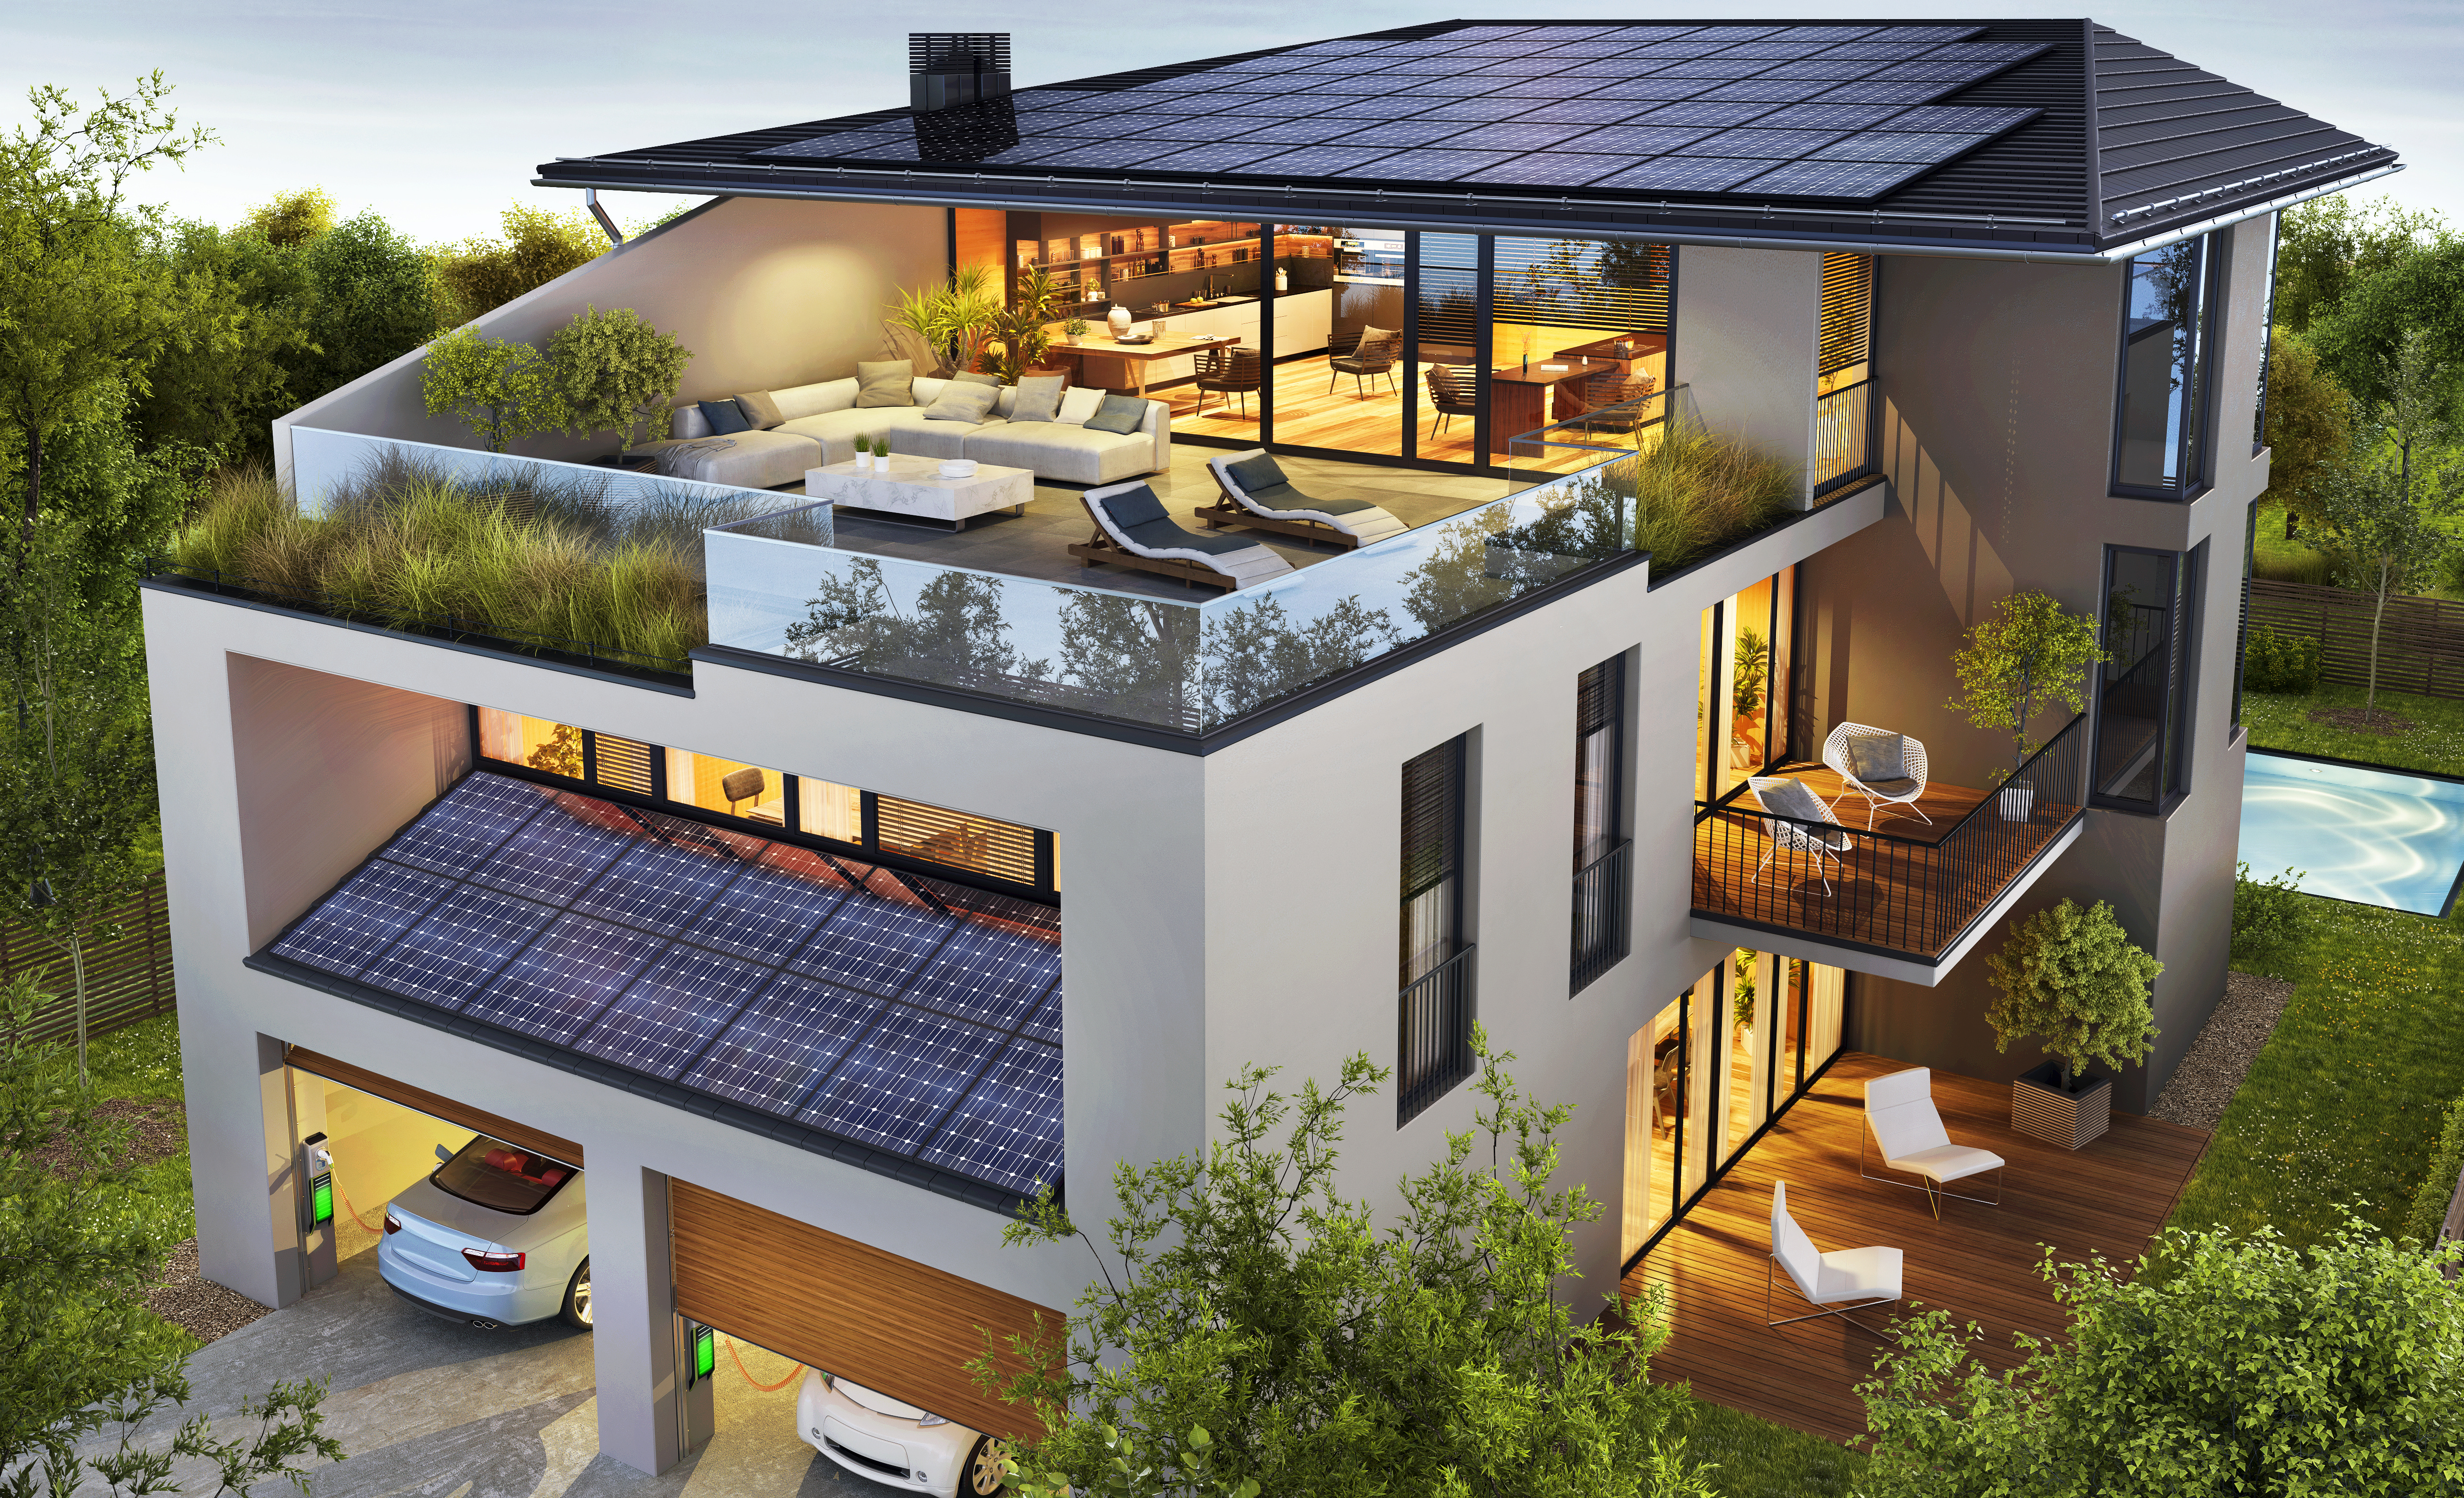 What is a Net Zero Home